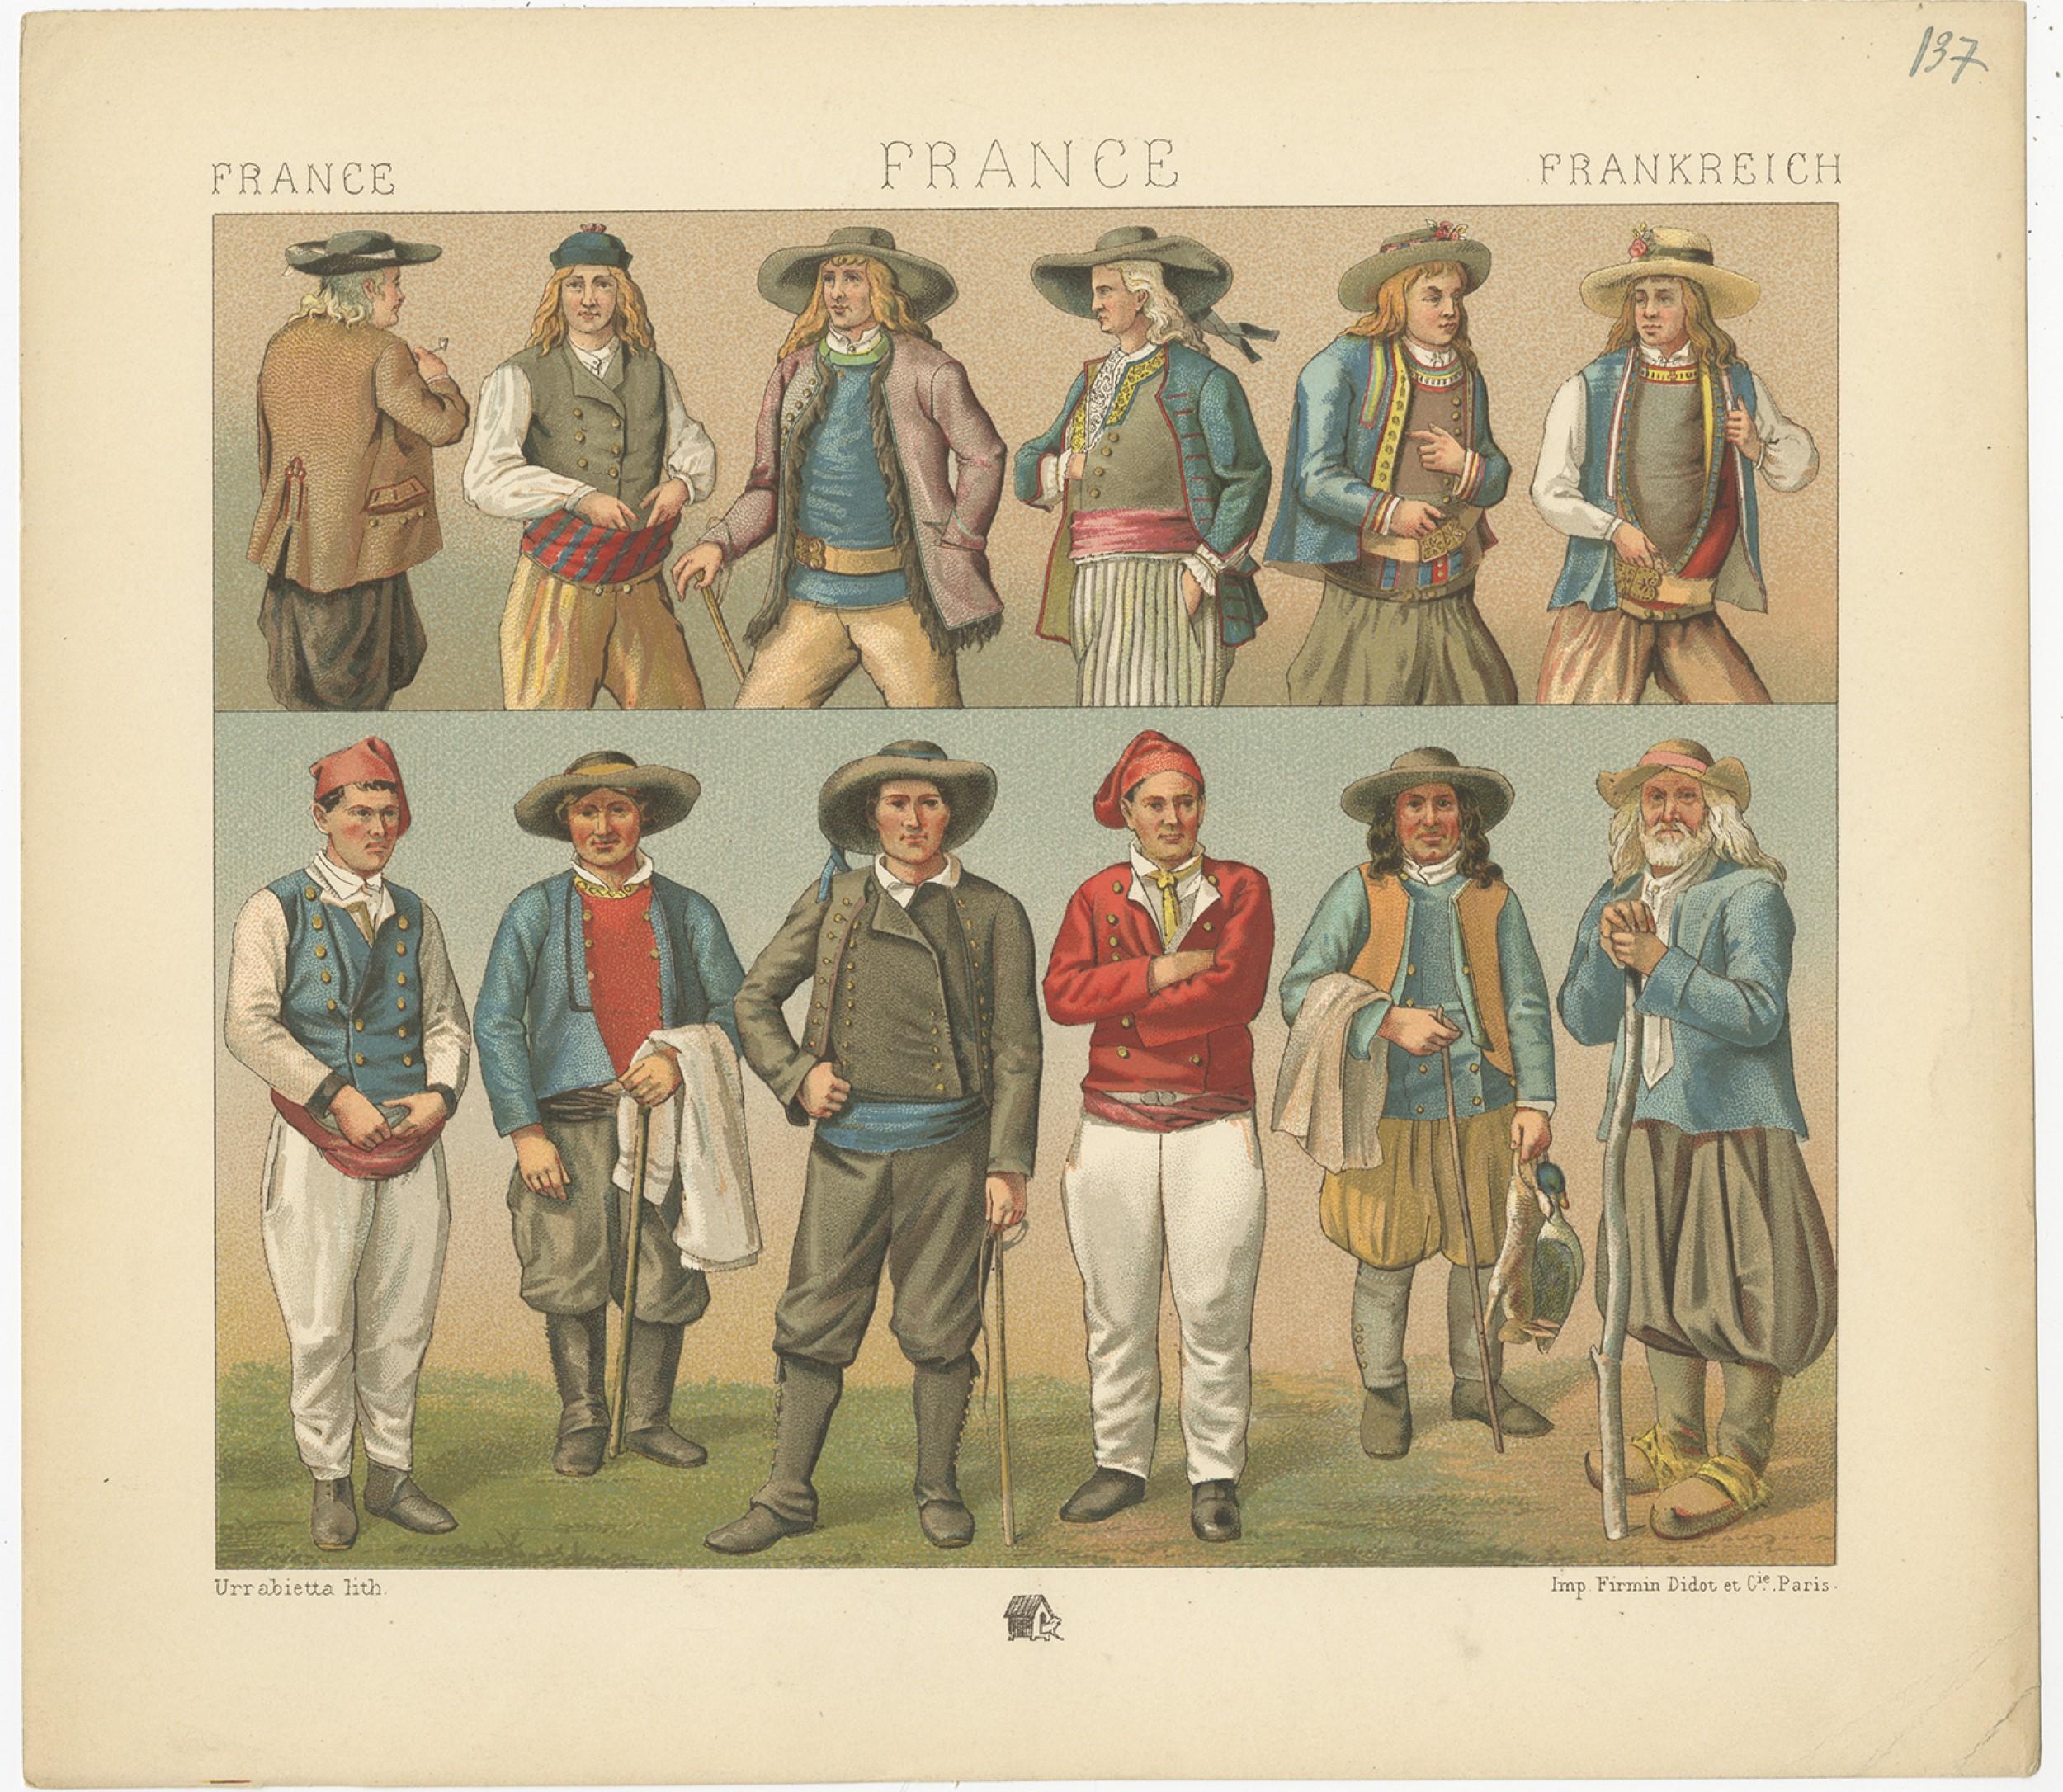 Antique print titled 'France - France - Frankreich'. Chromolithograph of French Outfits. This print originates from 'Le Costume Historique' by M.A. Racinet. Published, circa 1880.
 
 